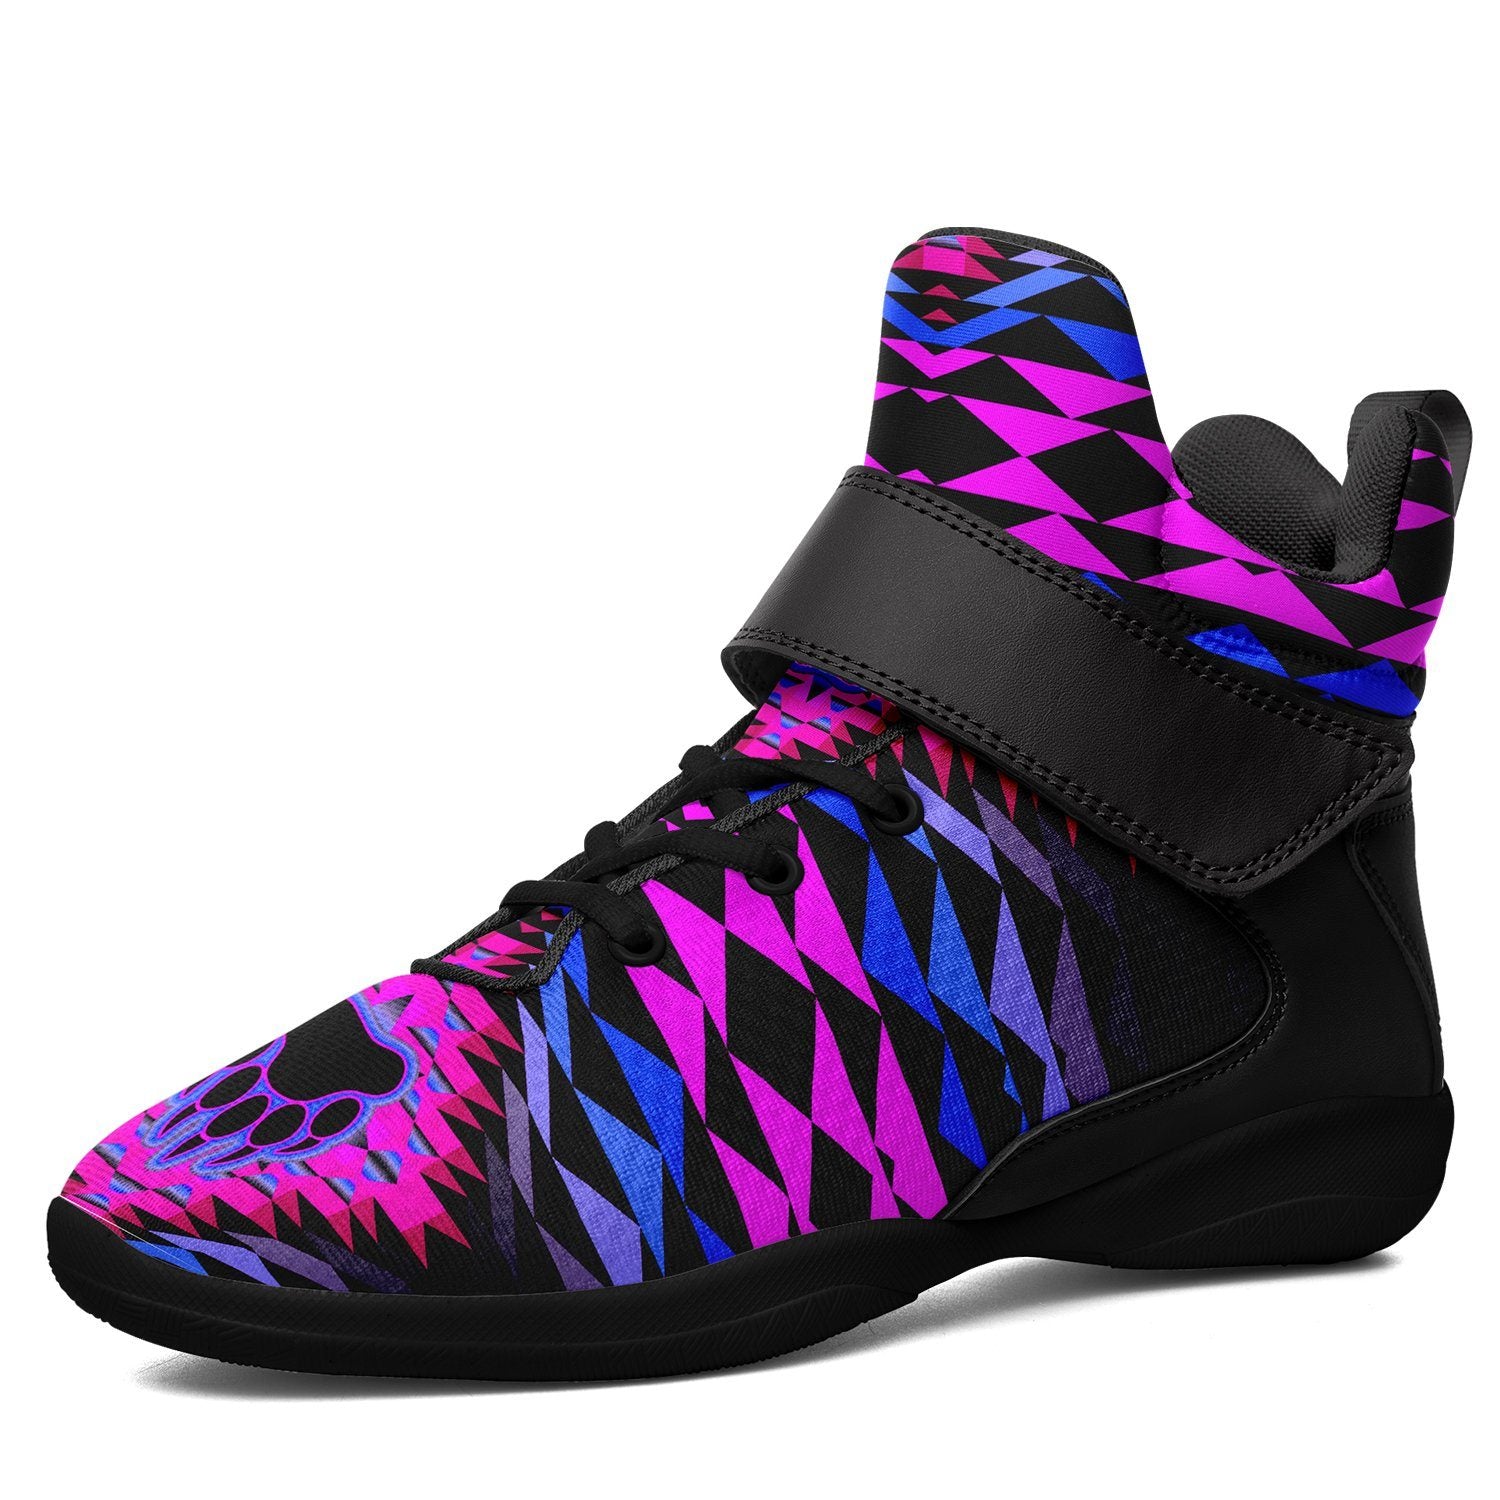 Sunset Bearpaw Blanket Pink Ipottaa Basketball / Sport High Top Shoes 49 Dzine US Women 4.5 / US Youth 3.5 / EUR 35 Black Sole with Black Strap 